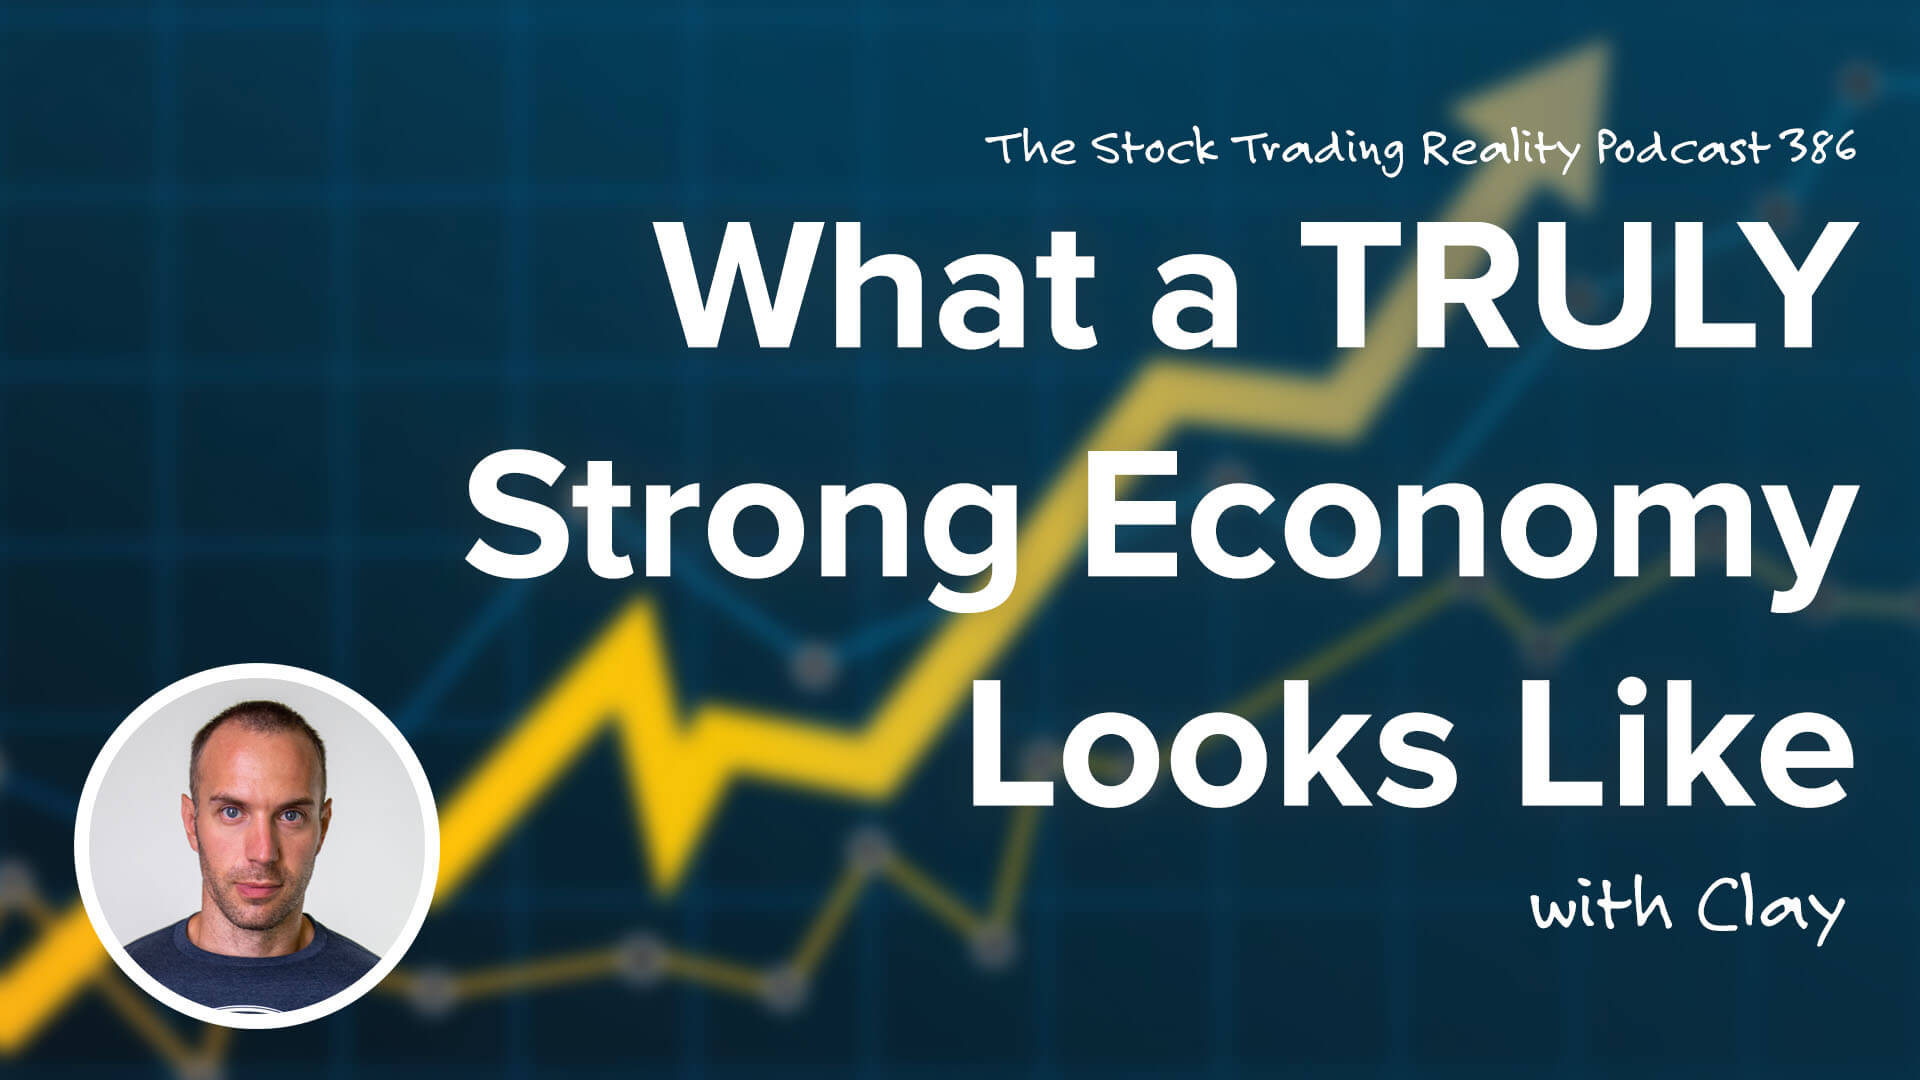 What a TRUELY Strong Economy Looks Like | STR 386